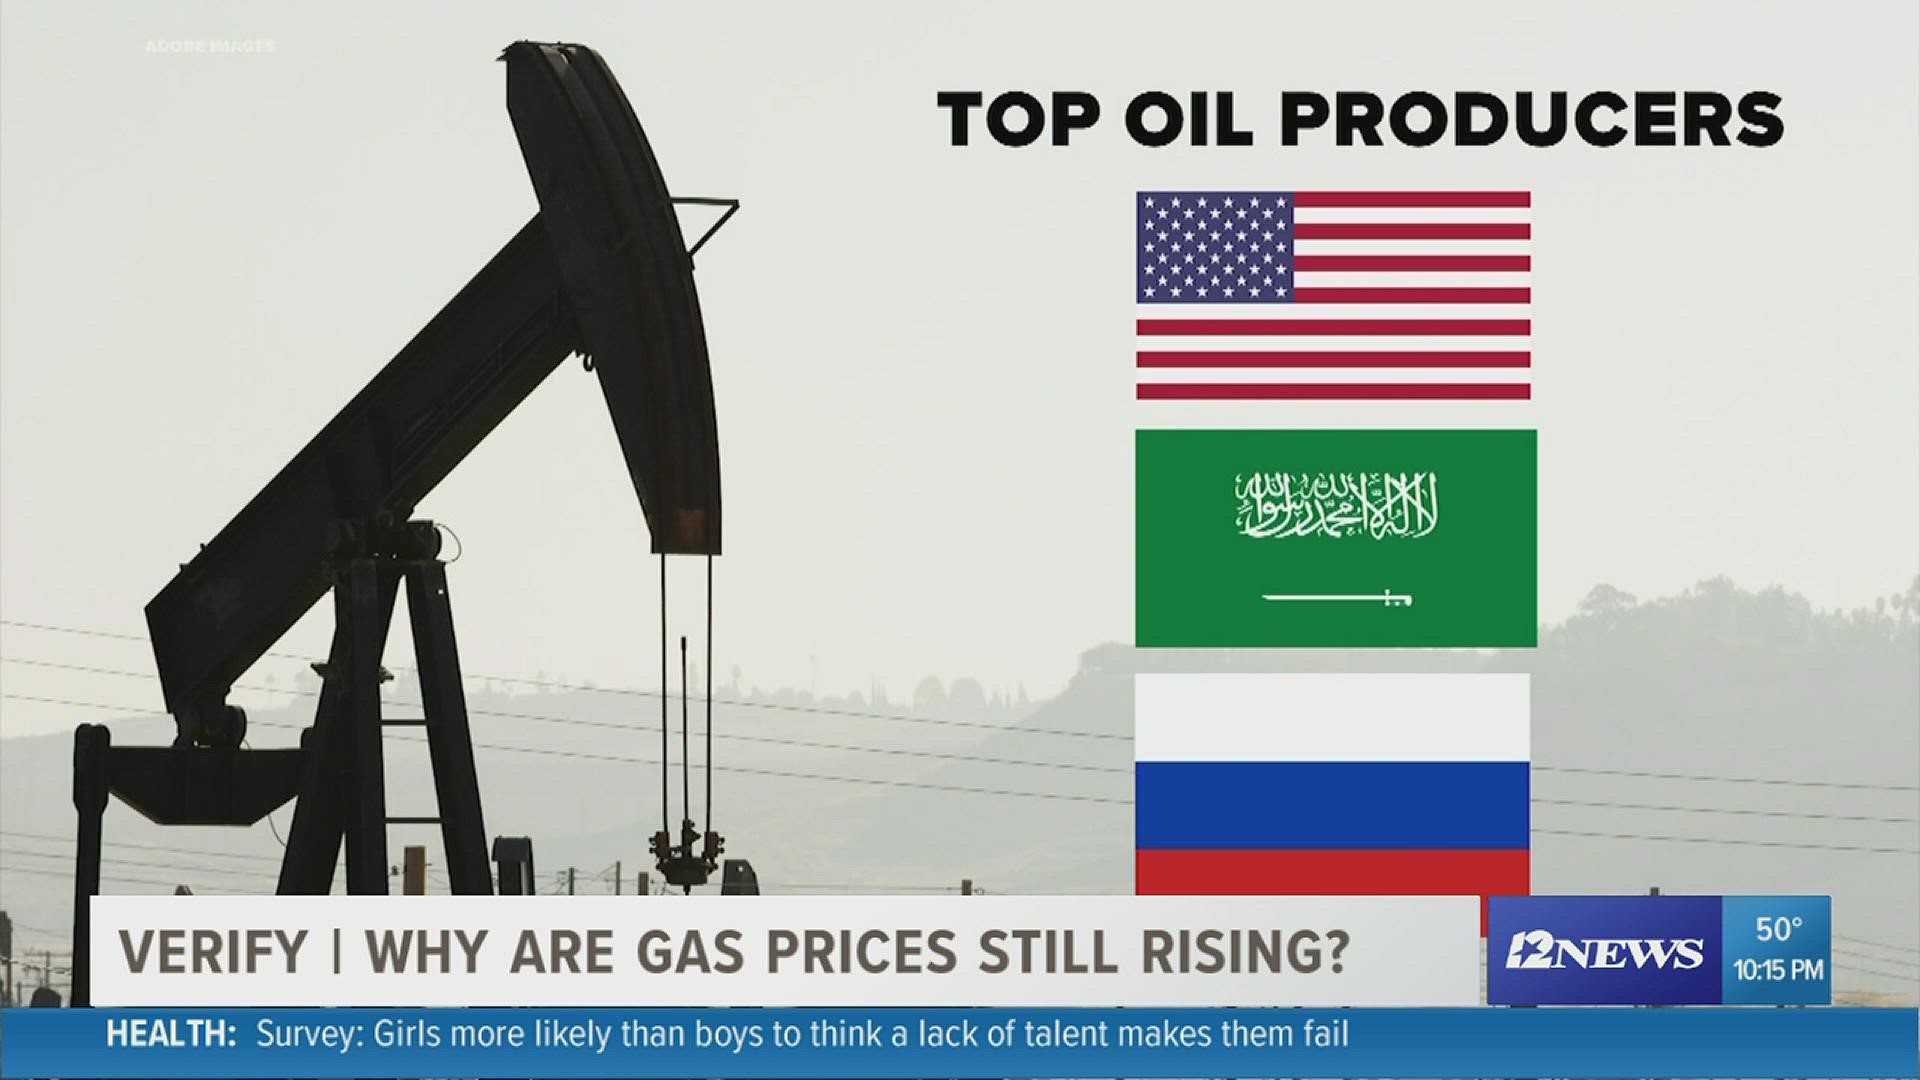 The US and Russia are in the top three positions for oil producers in the world.